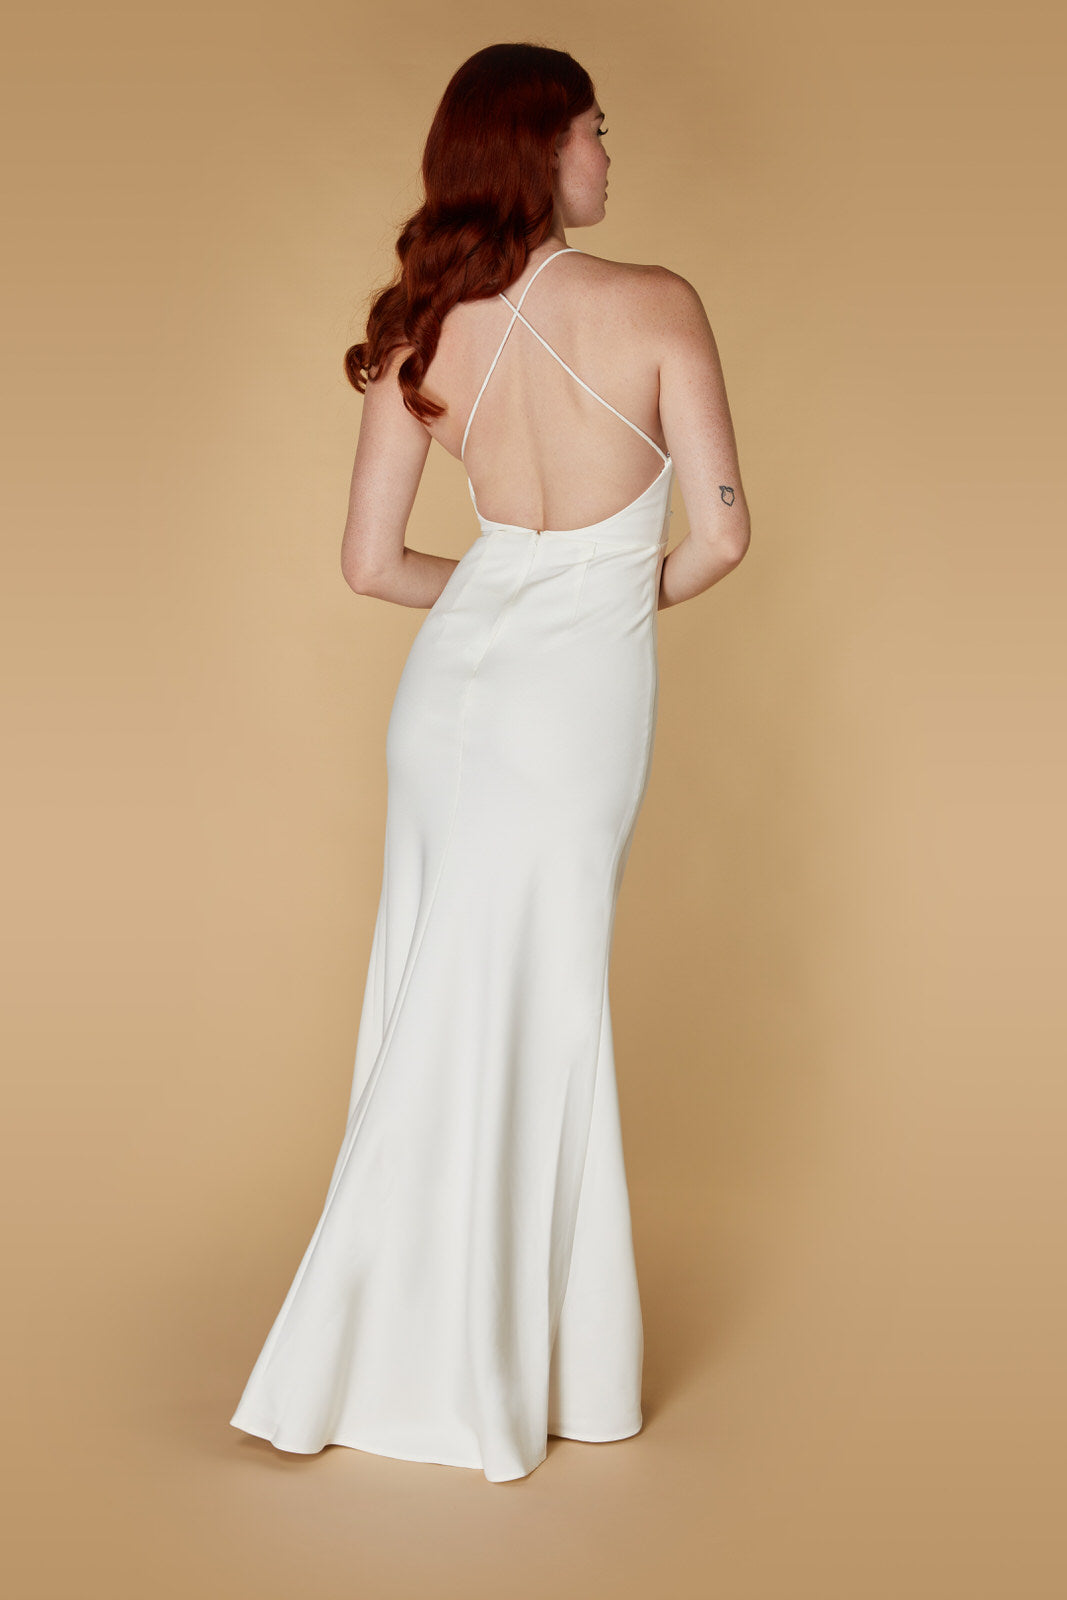 Jarlo white fishtail maxi dress with cross back strap detail